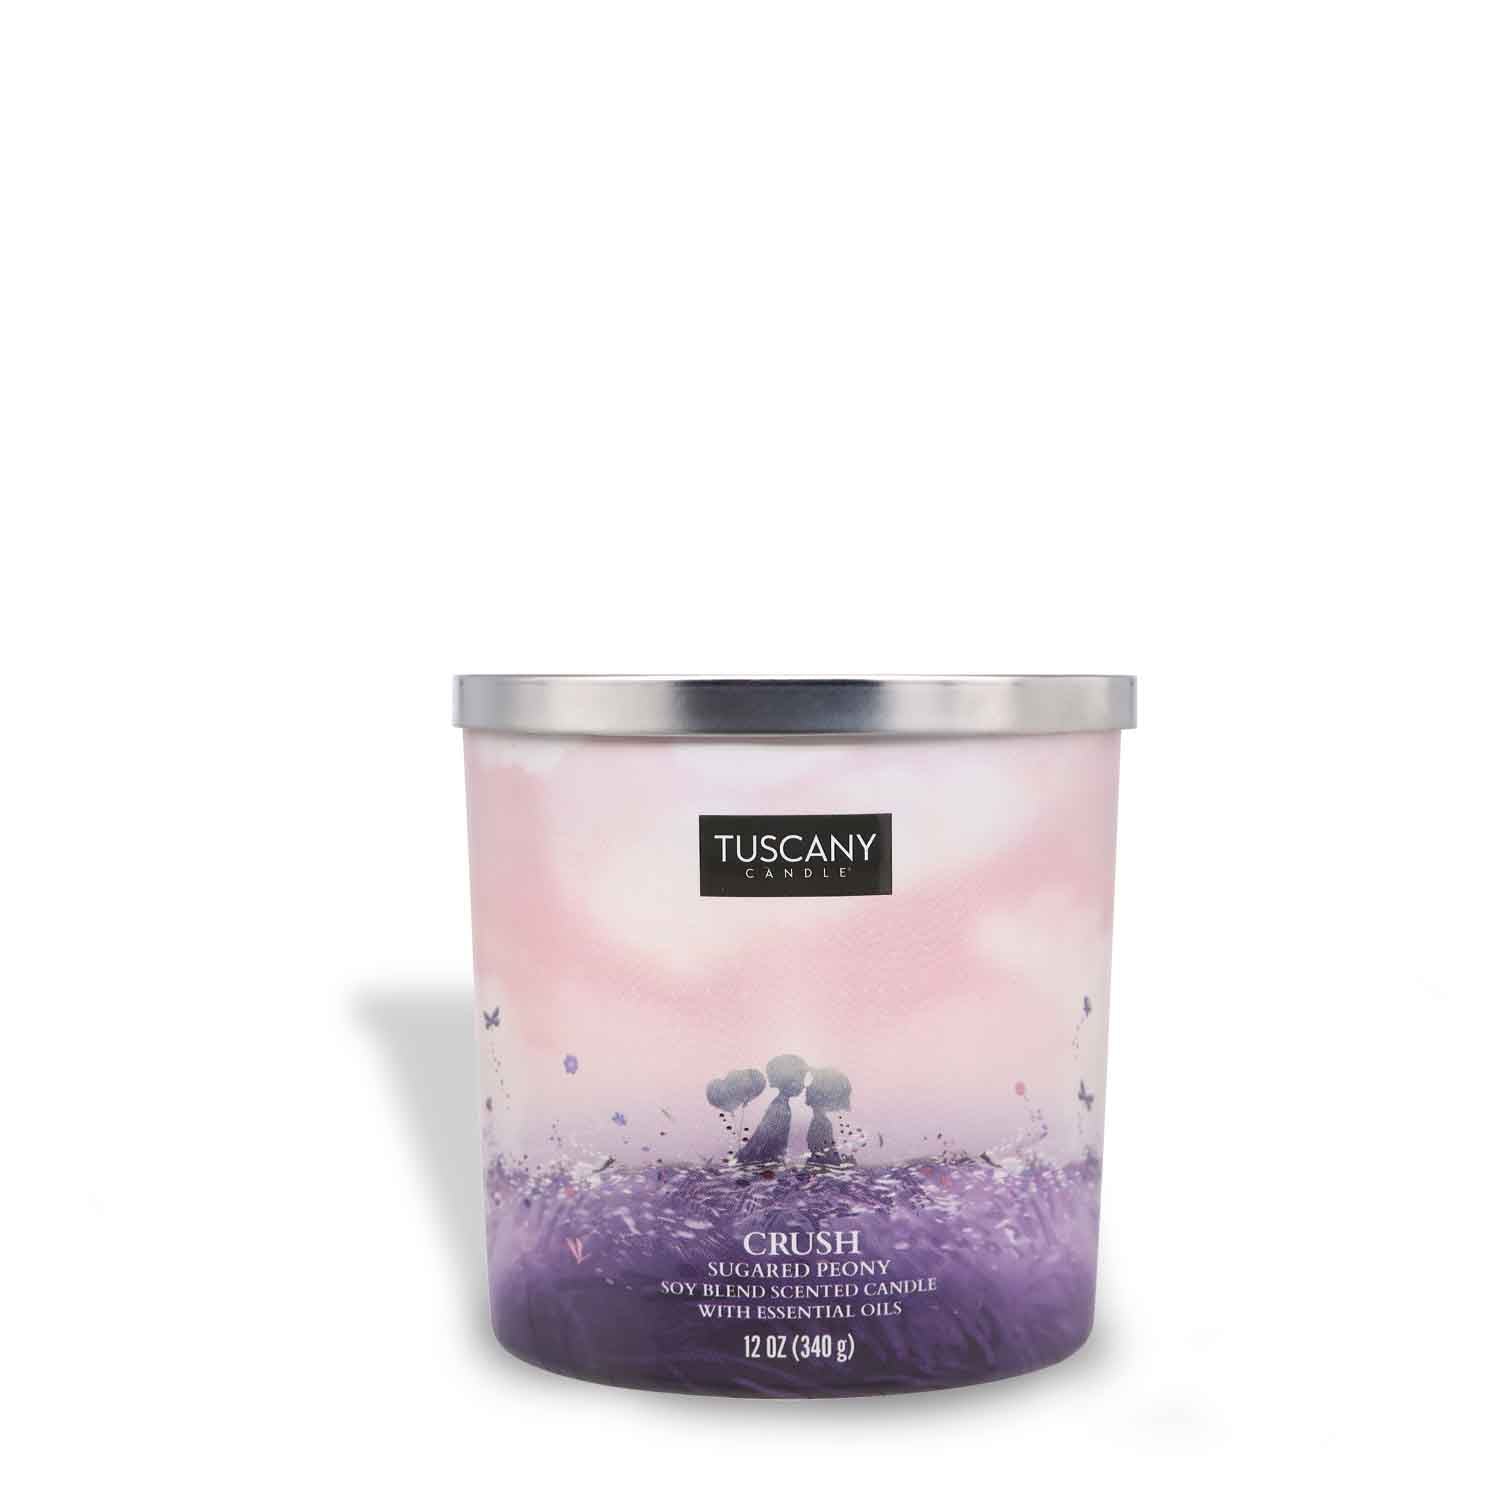 A tin of Crush Scented Jar Candle (12 oz) from the Tuscany Candle® SEASONAL Carried Away Collection, reminiscent of a sugared vanilla peony.